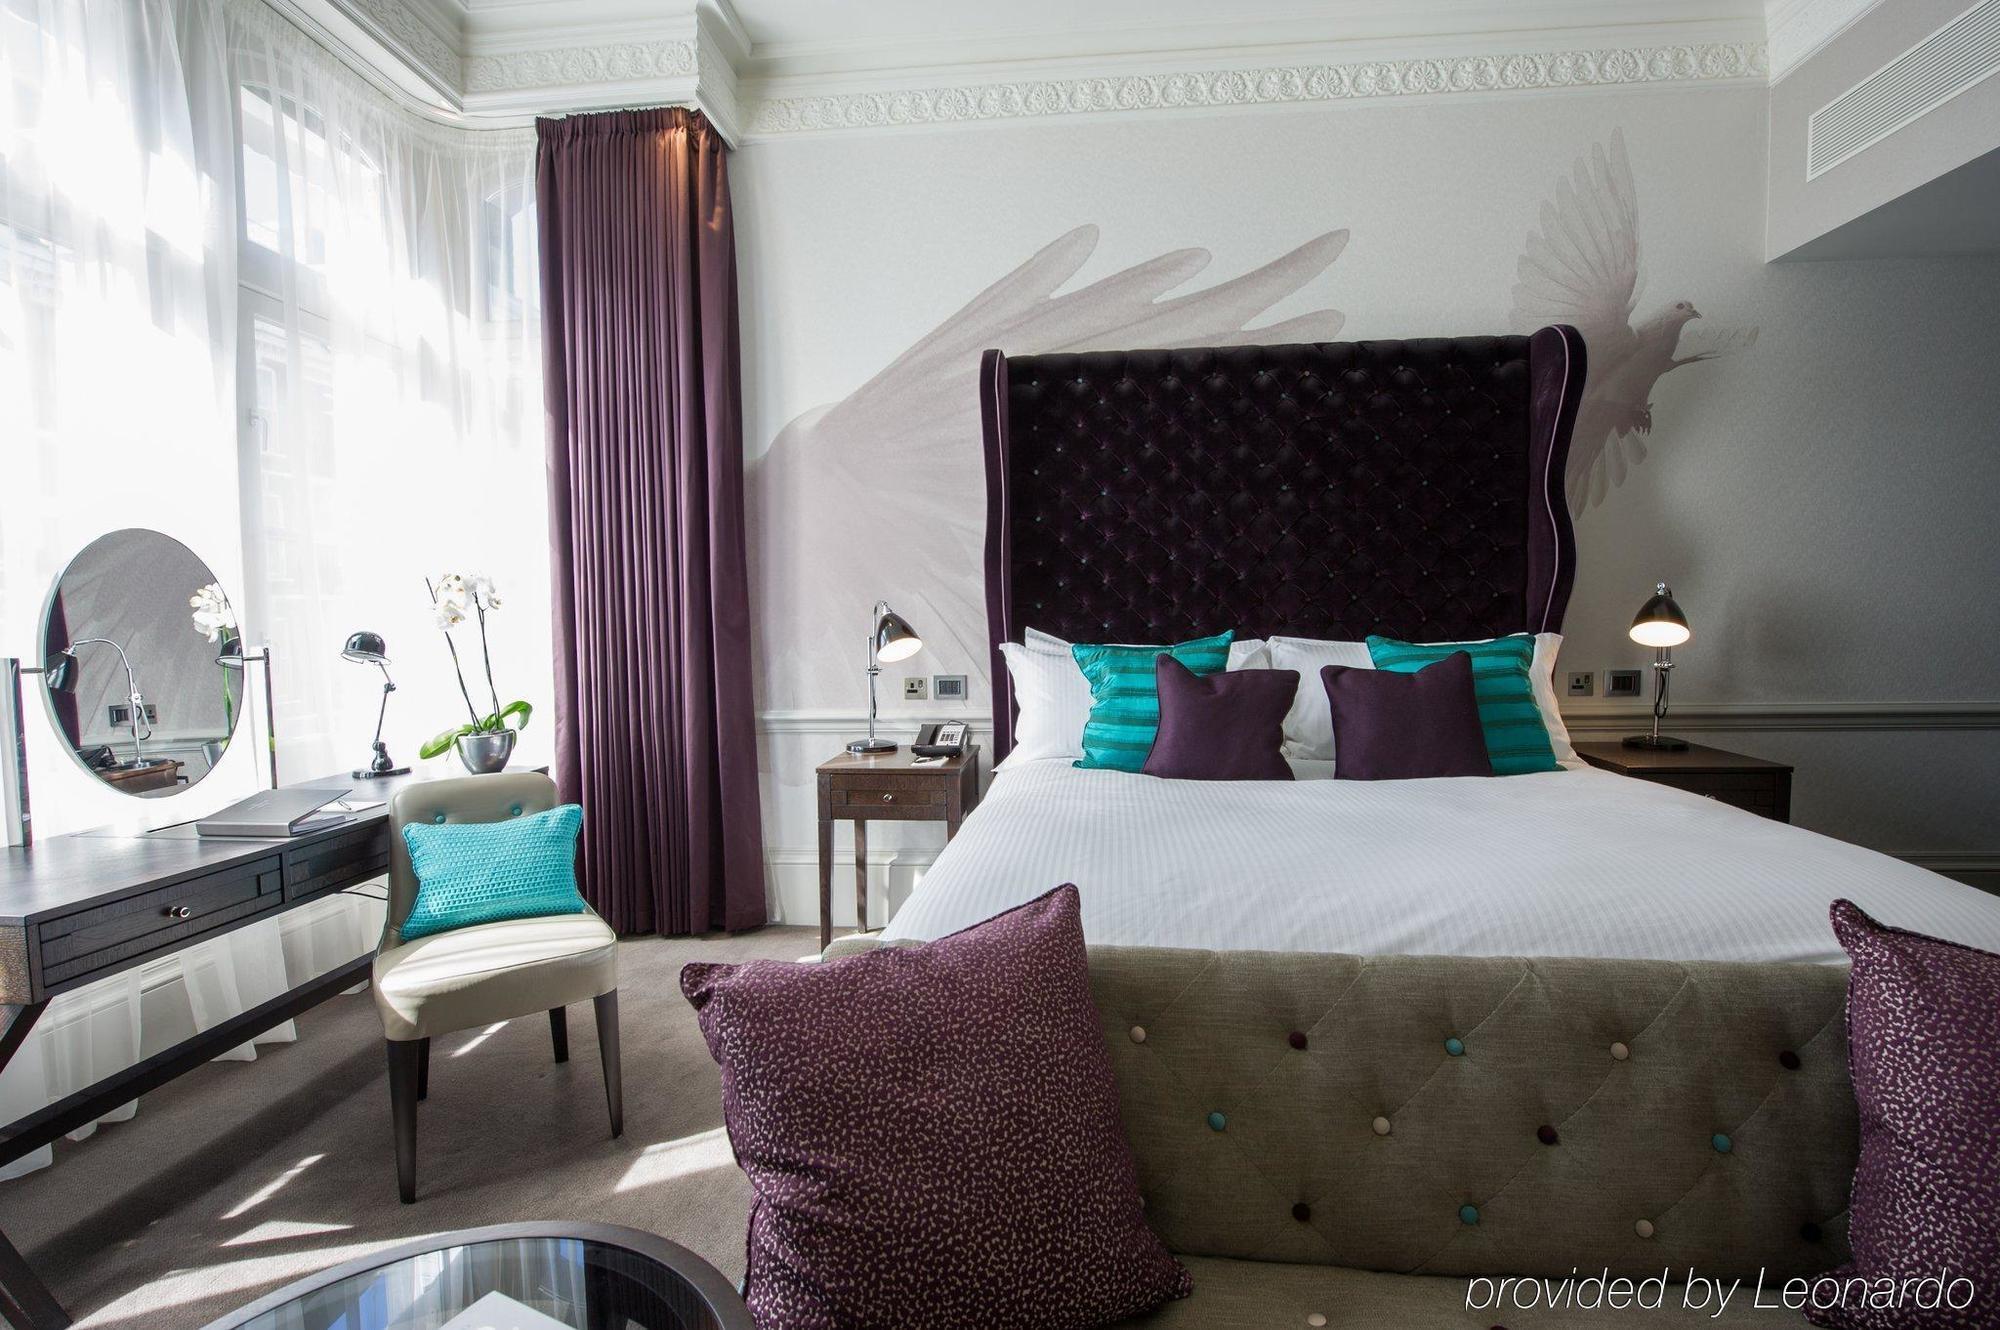 The Ampersand Hotel London Room photo